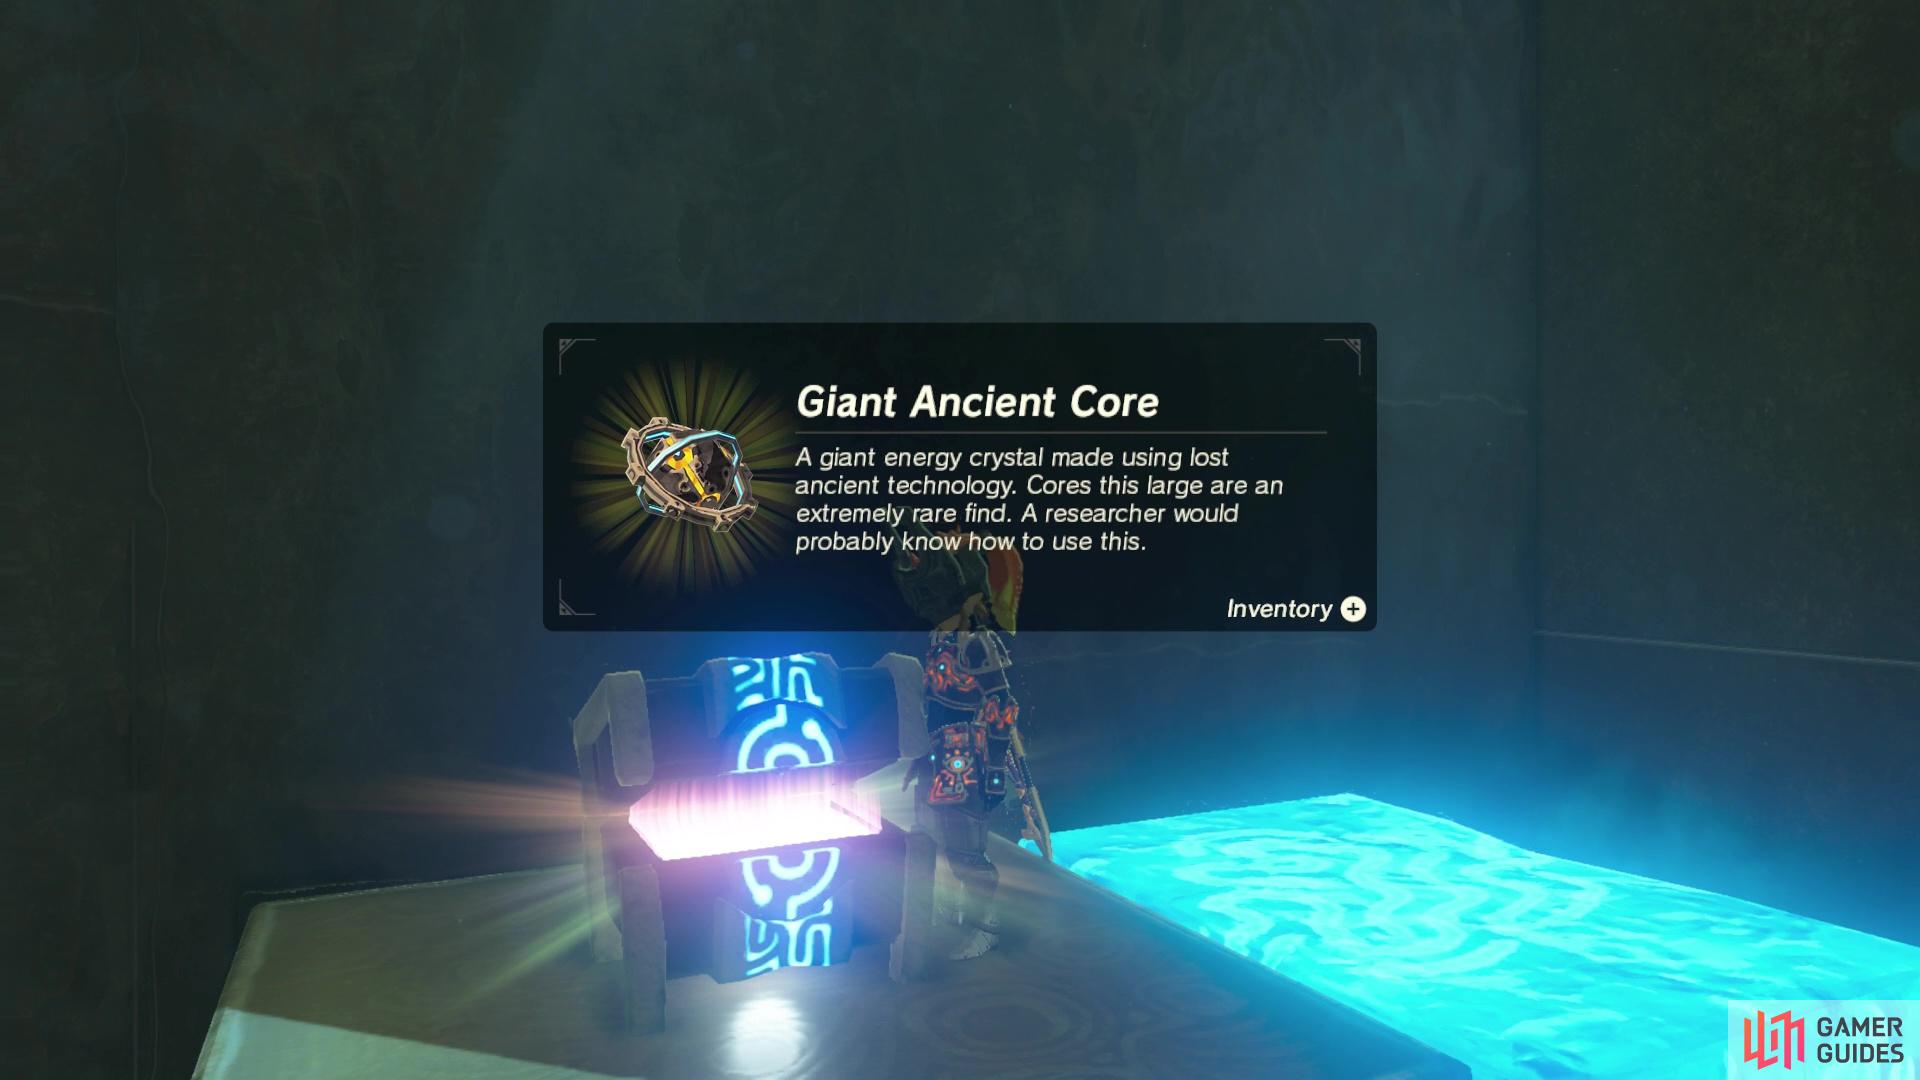 then you can grab the Giant Ancient Core.